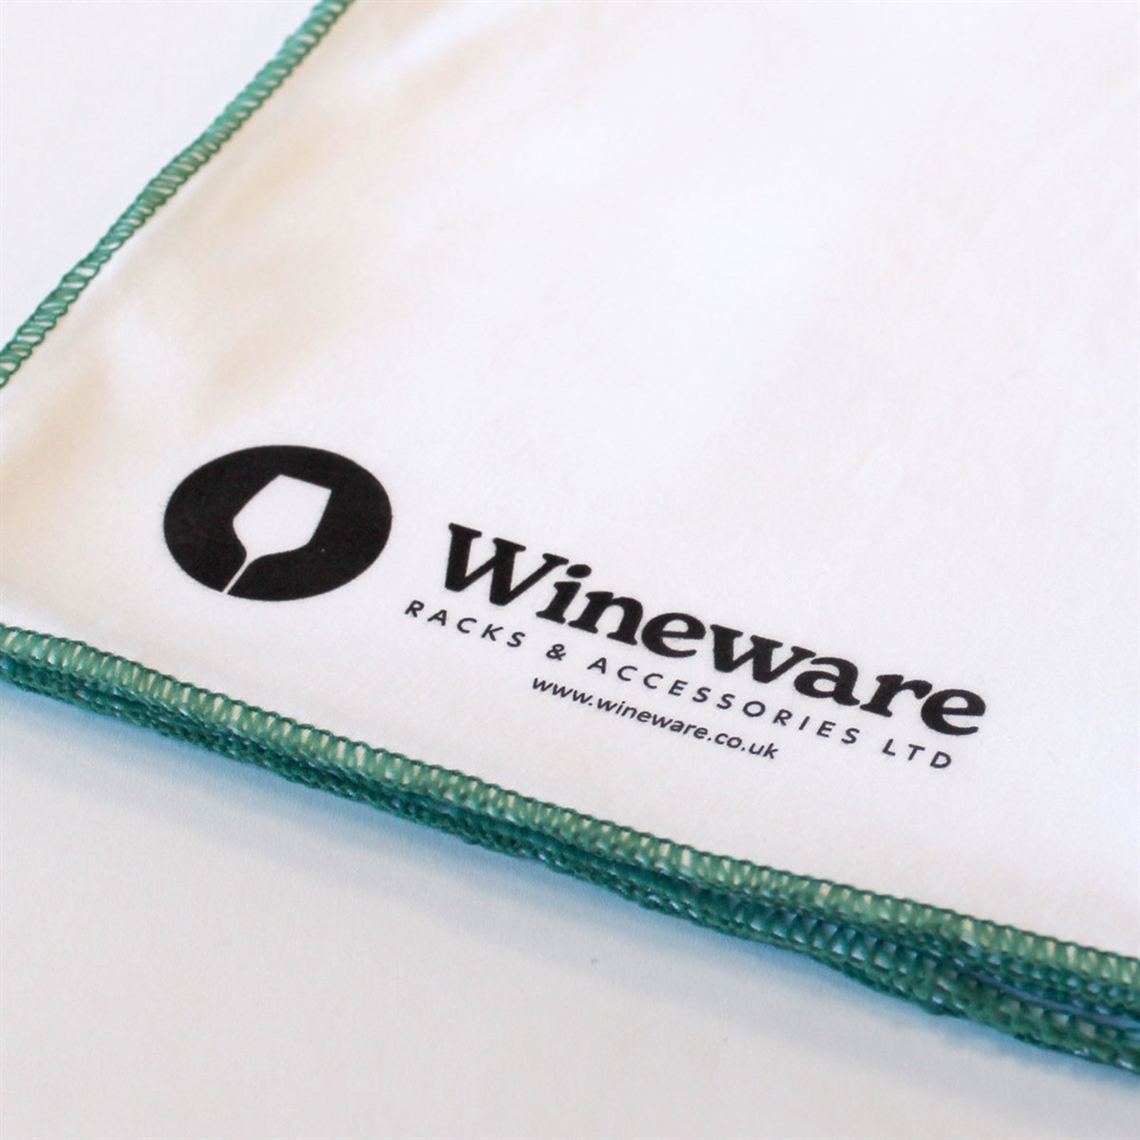 View more glass and co from our Wine Glass Cleaning & Accessories range